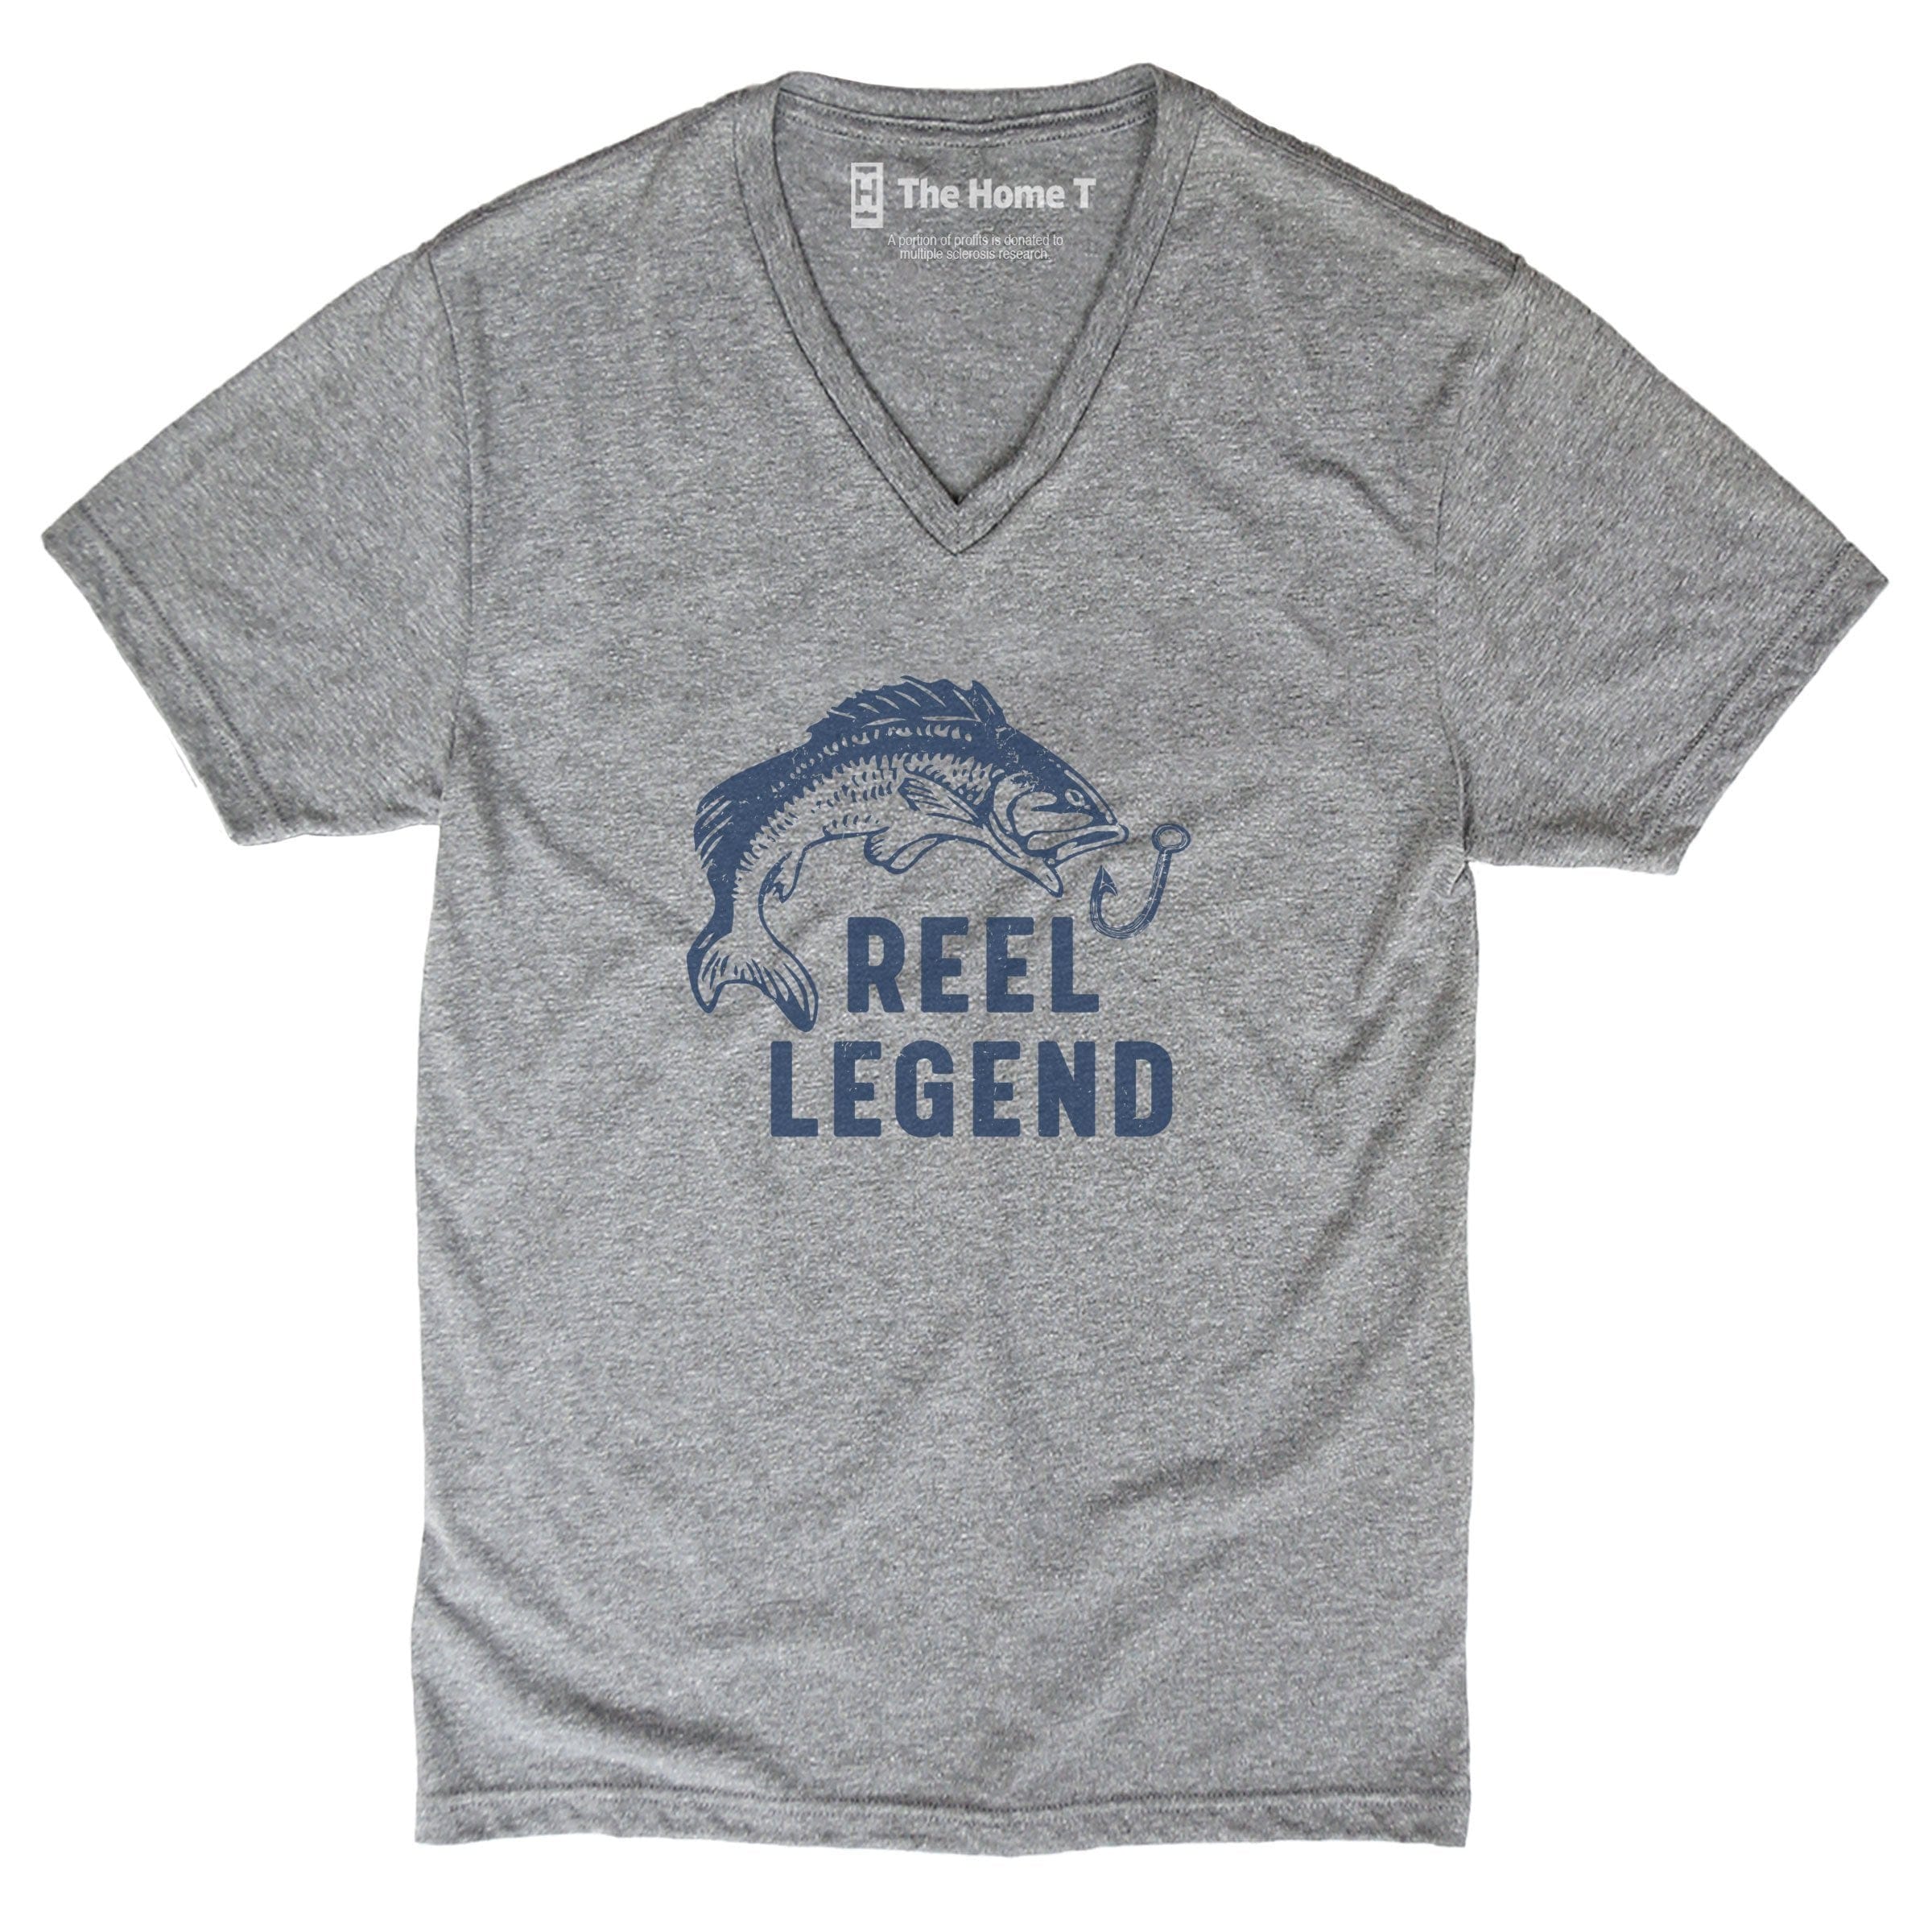 Reel Legend Grey T-Shirt, Father's Day Gift by The Home T